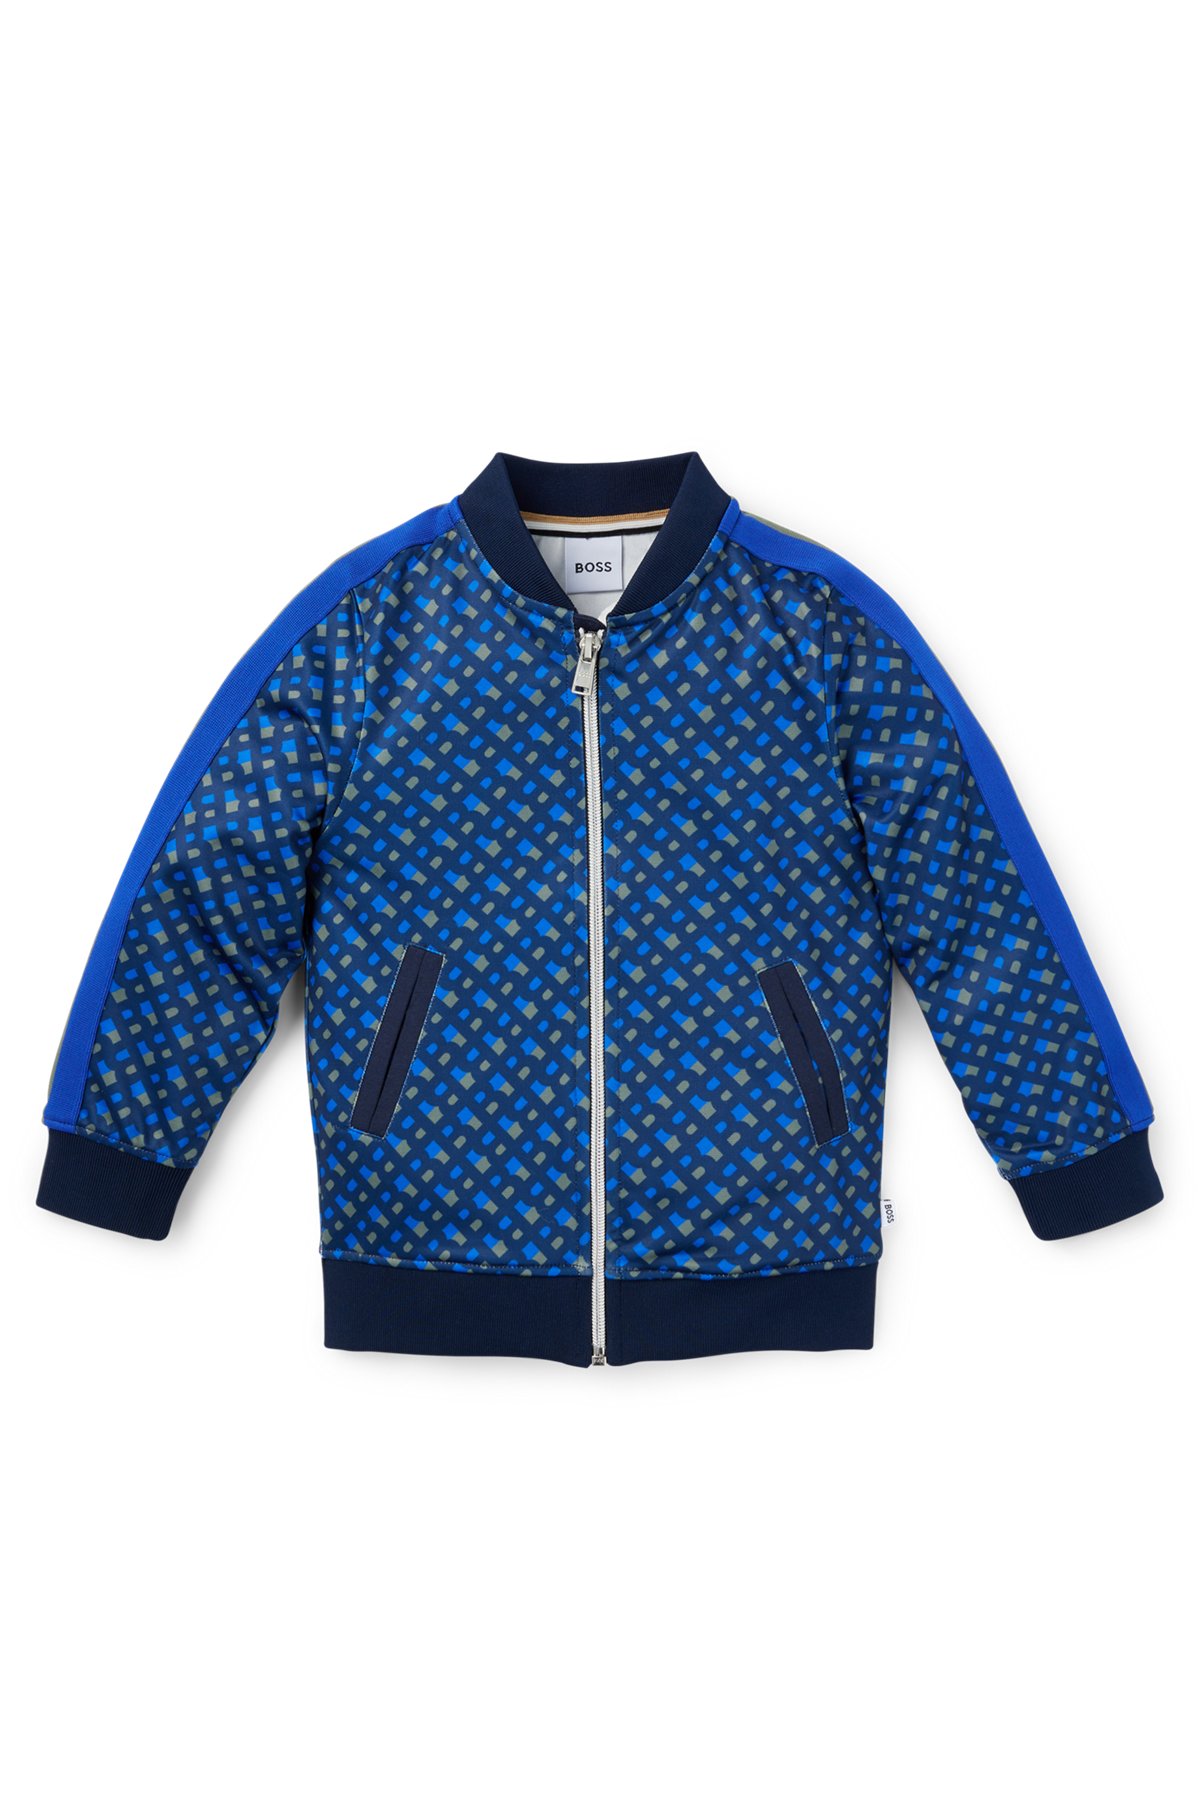 Boss Kids' Zip-Up Jacket with Monogram Print and Stripes